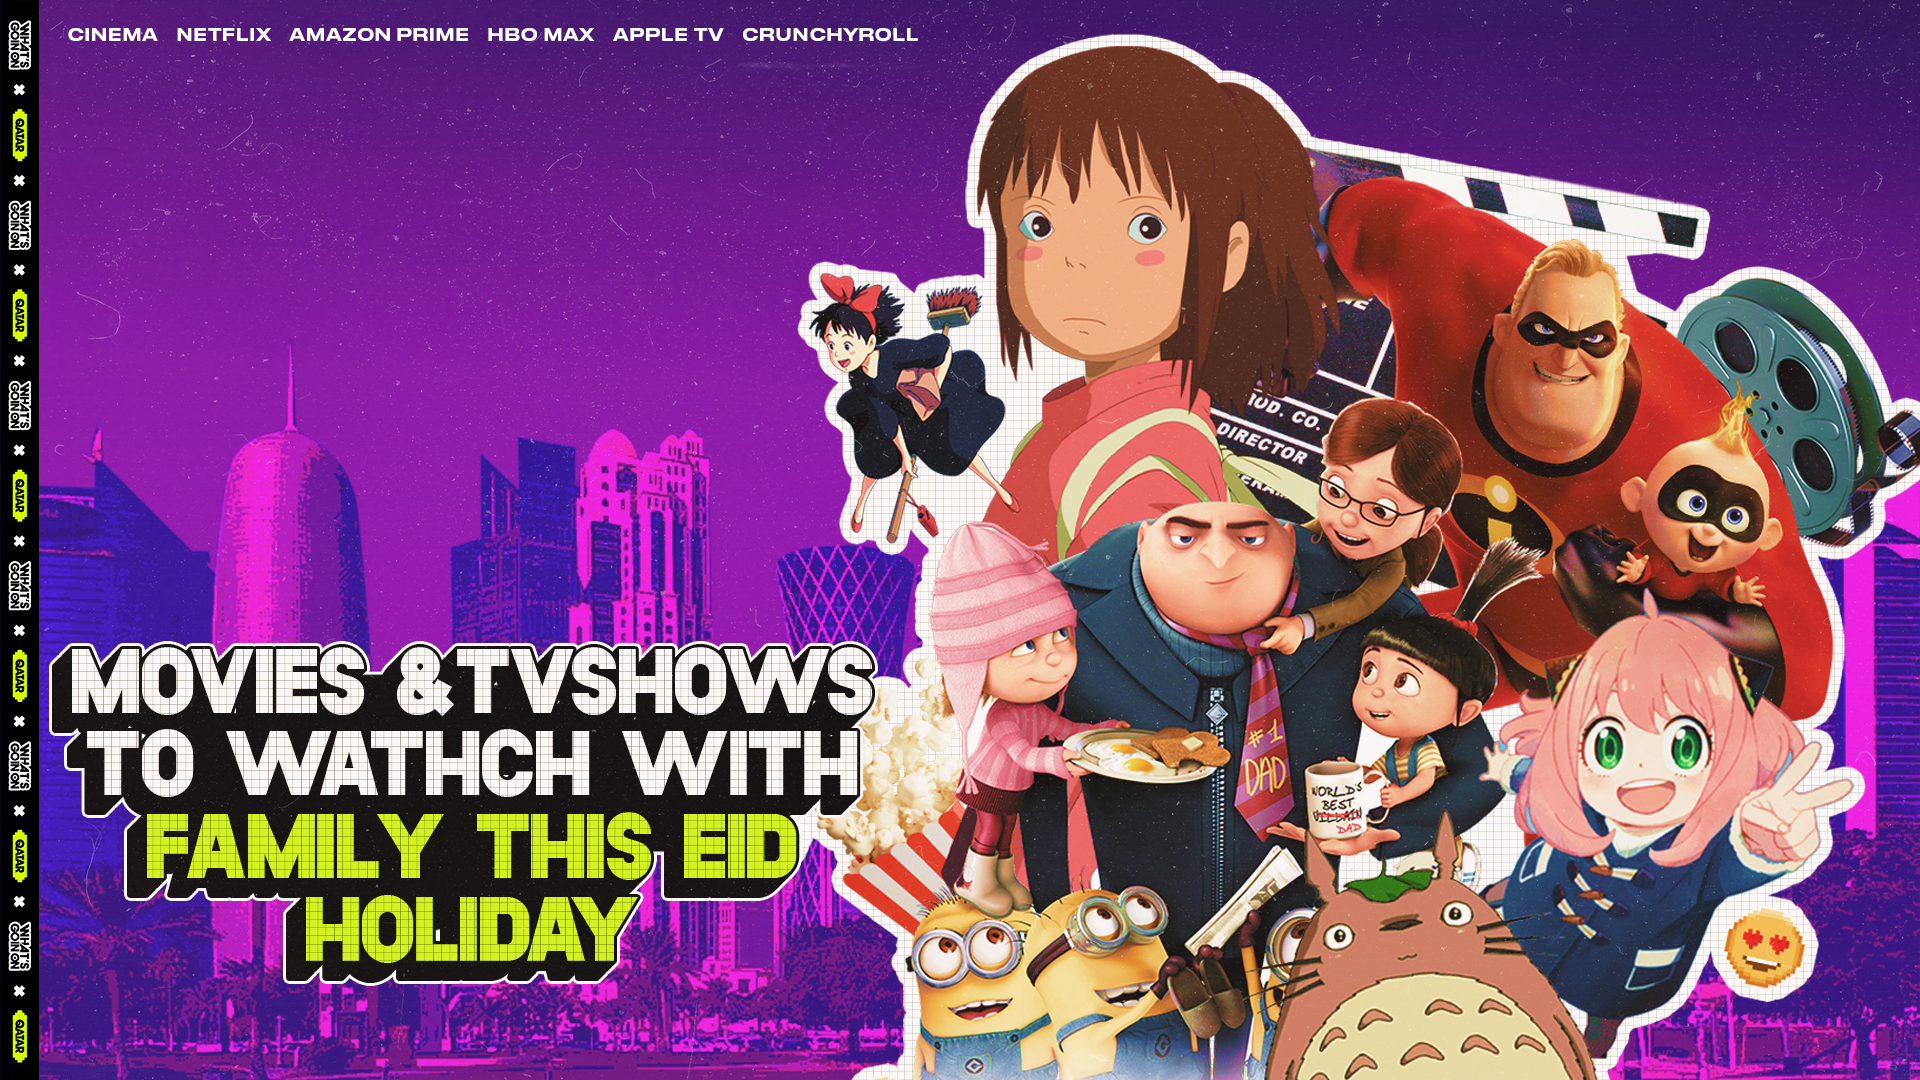 MOVIES & TV SHOW TO WATCH WITH FAMILY THIS EID HOLIDAY